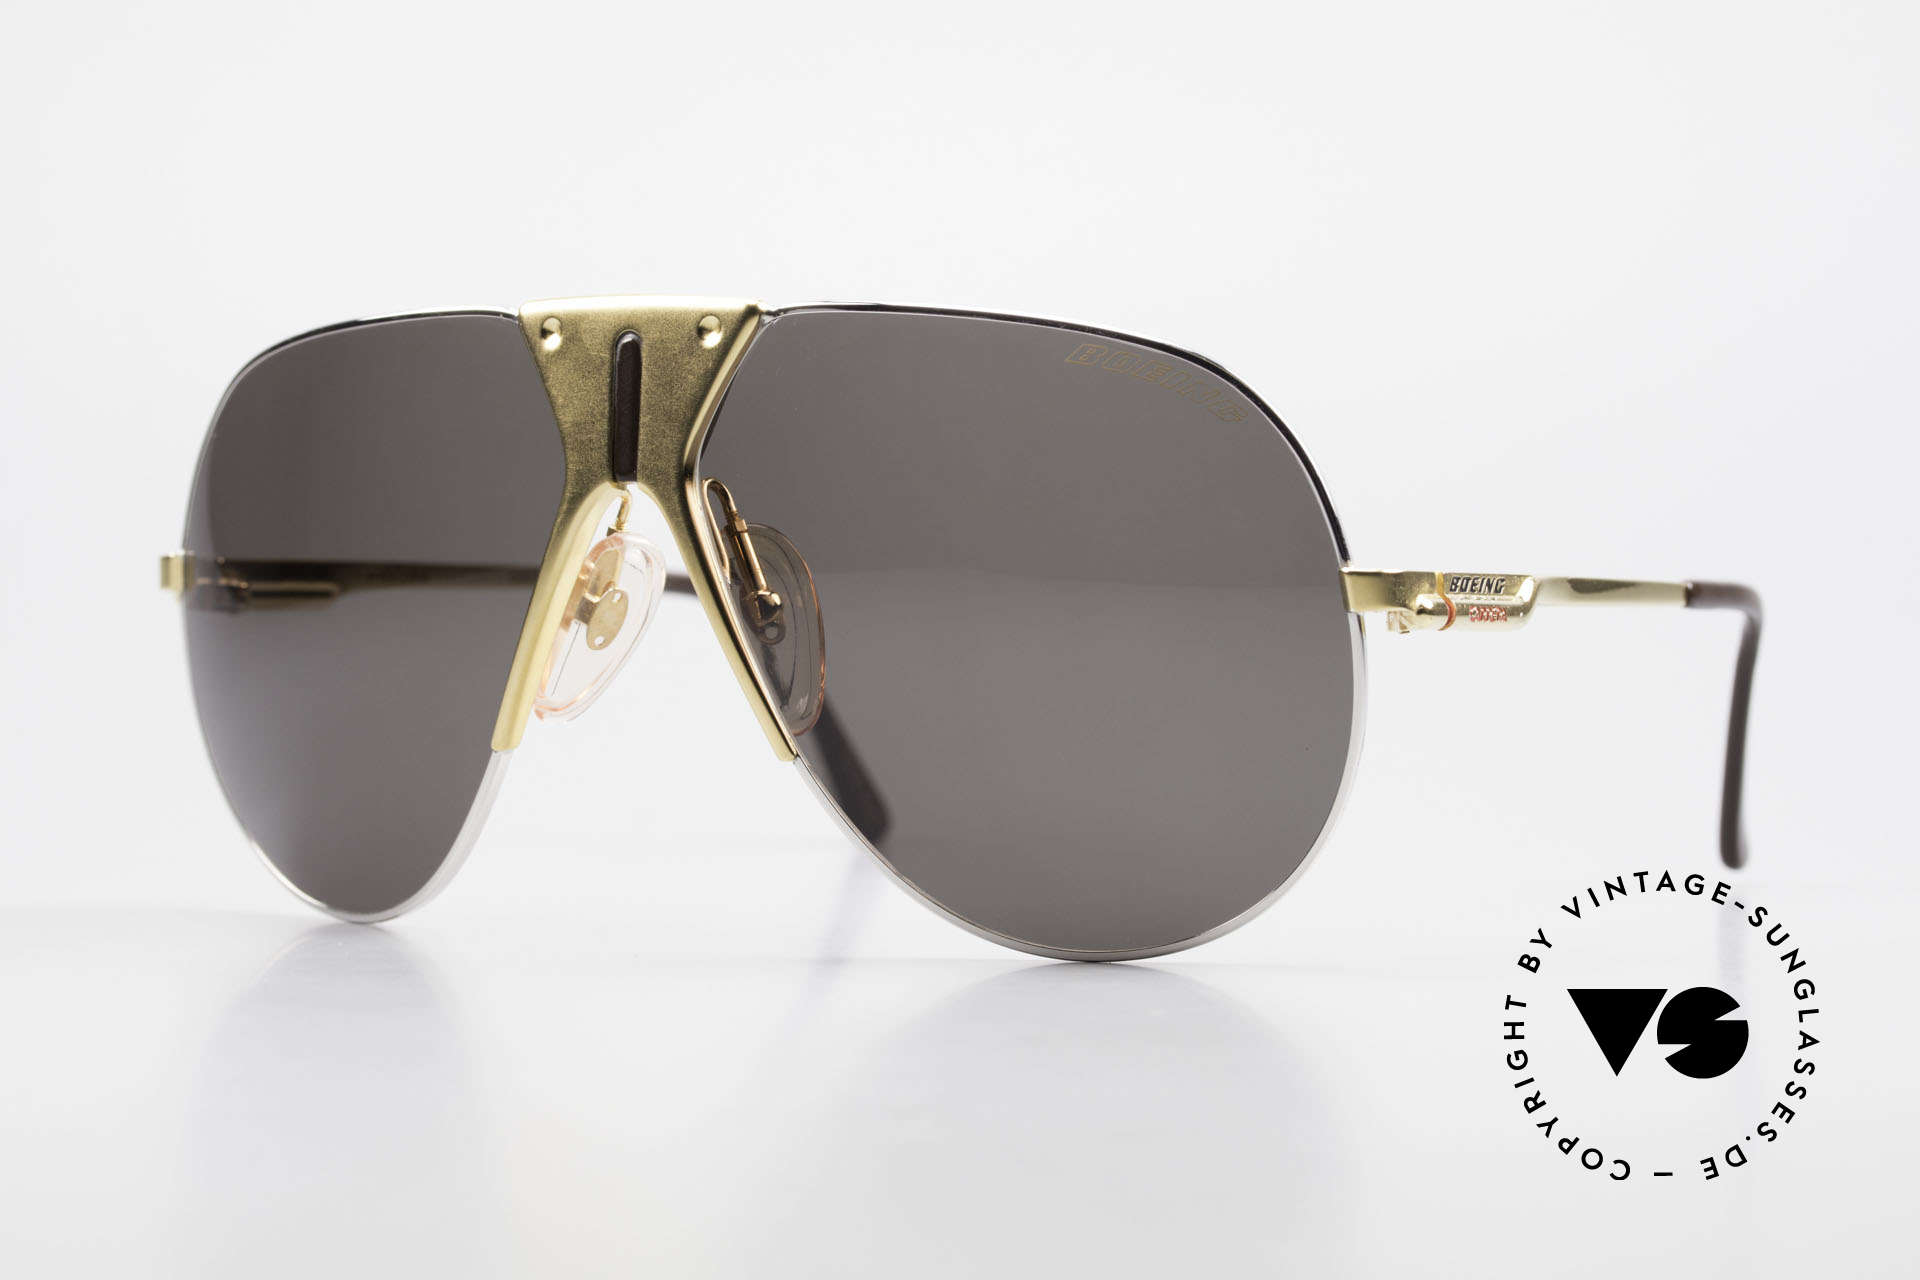 Boeing 5701 Famous 80's Pilots Shades, MOD. 5701 = the most famous model of this series, Made for Men and Women